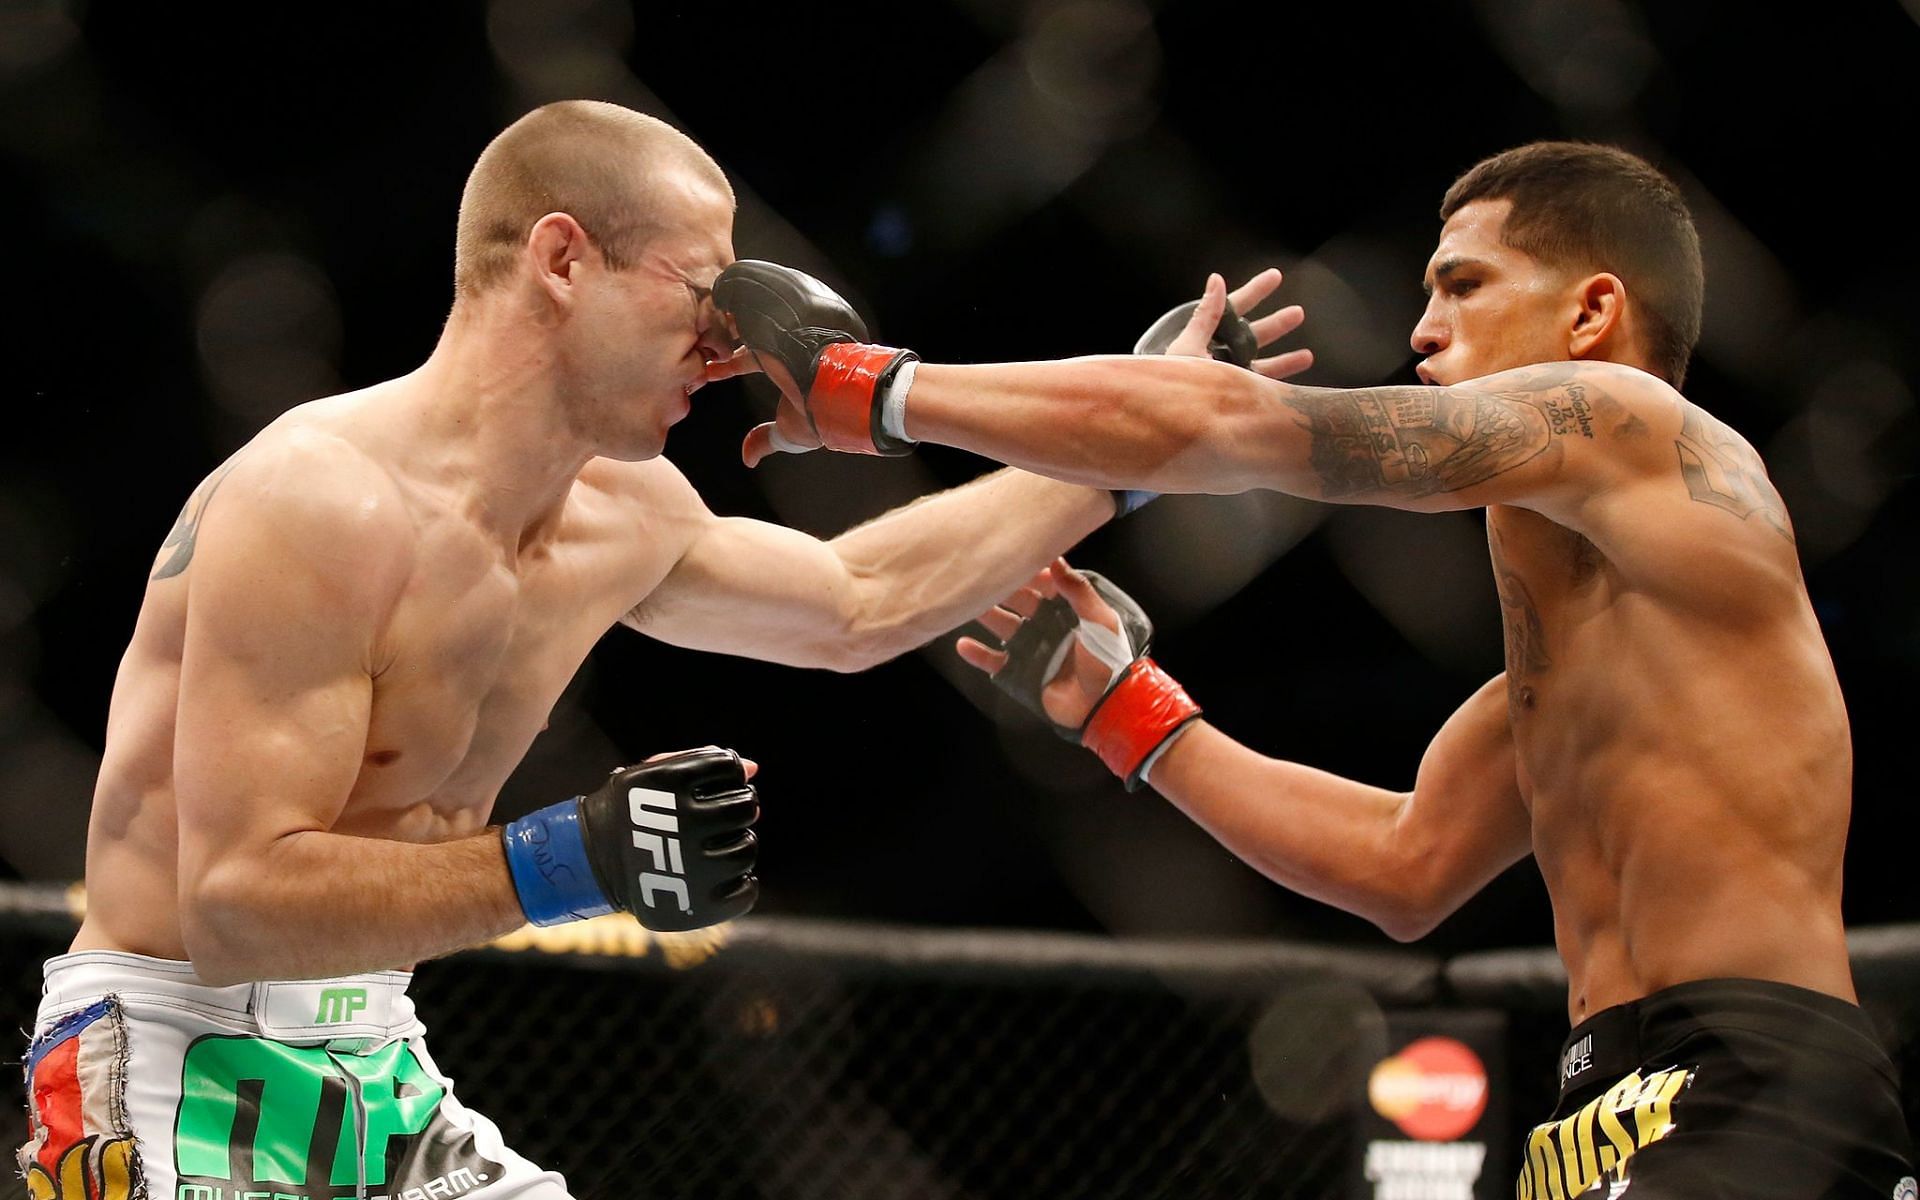 Cerrone and Pettis in action at UFC on FOX 6